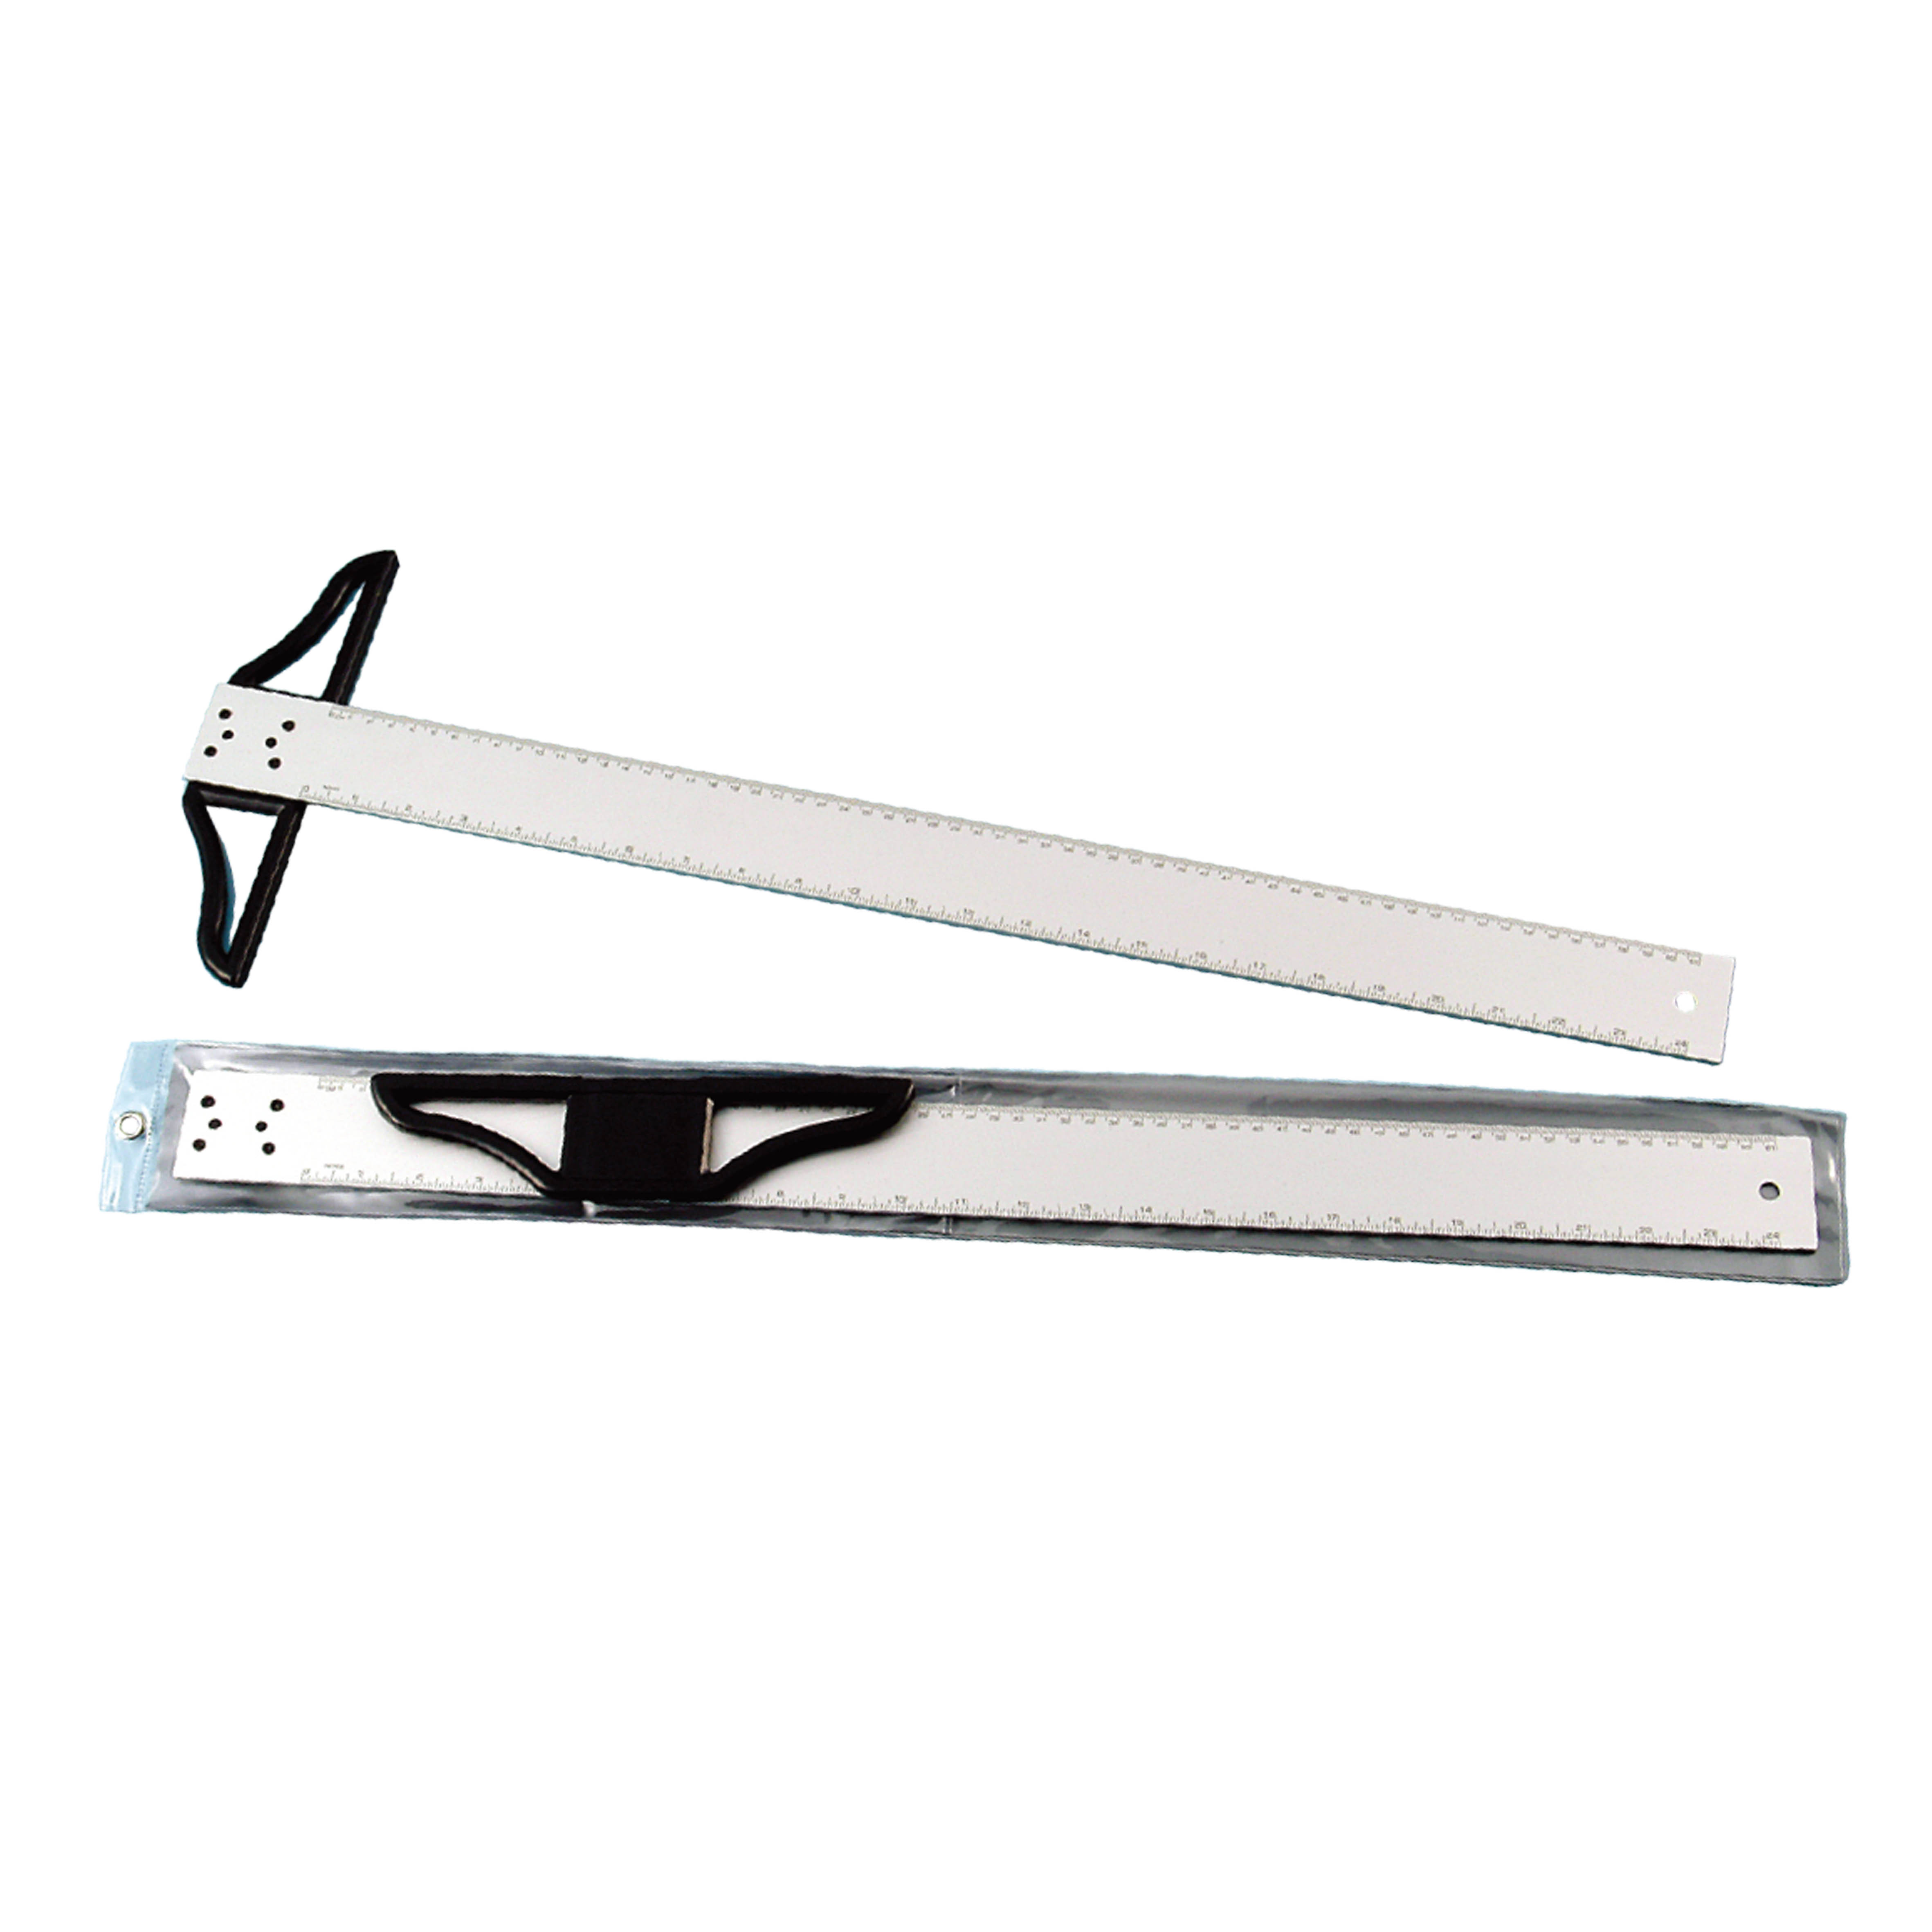 BEMATO STAINLESS STEEL SQUARES / SQUARE RULERS